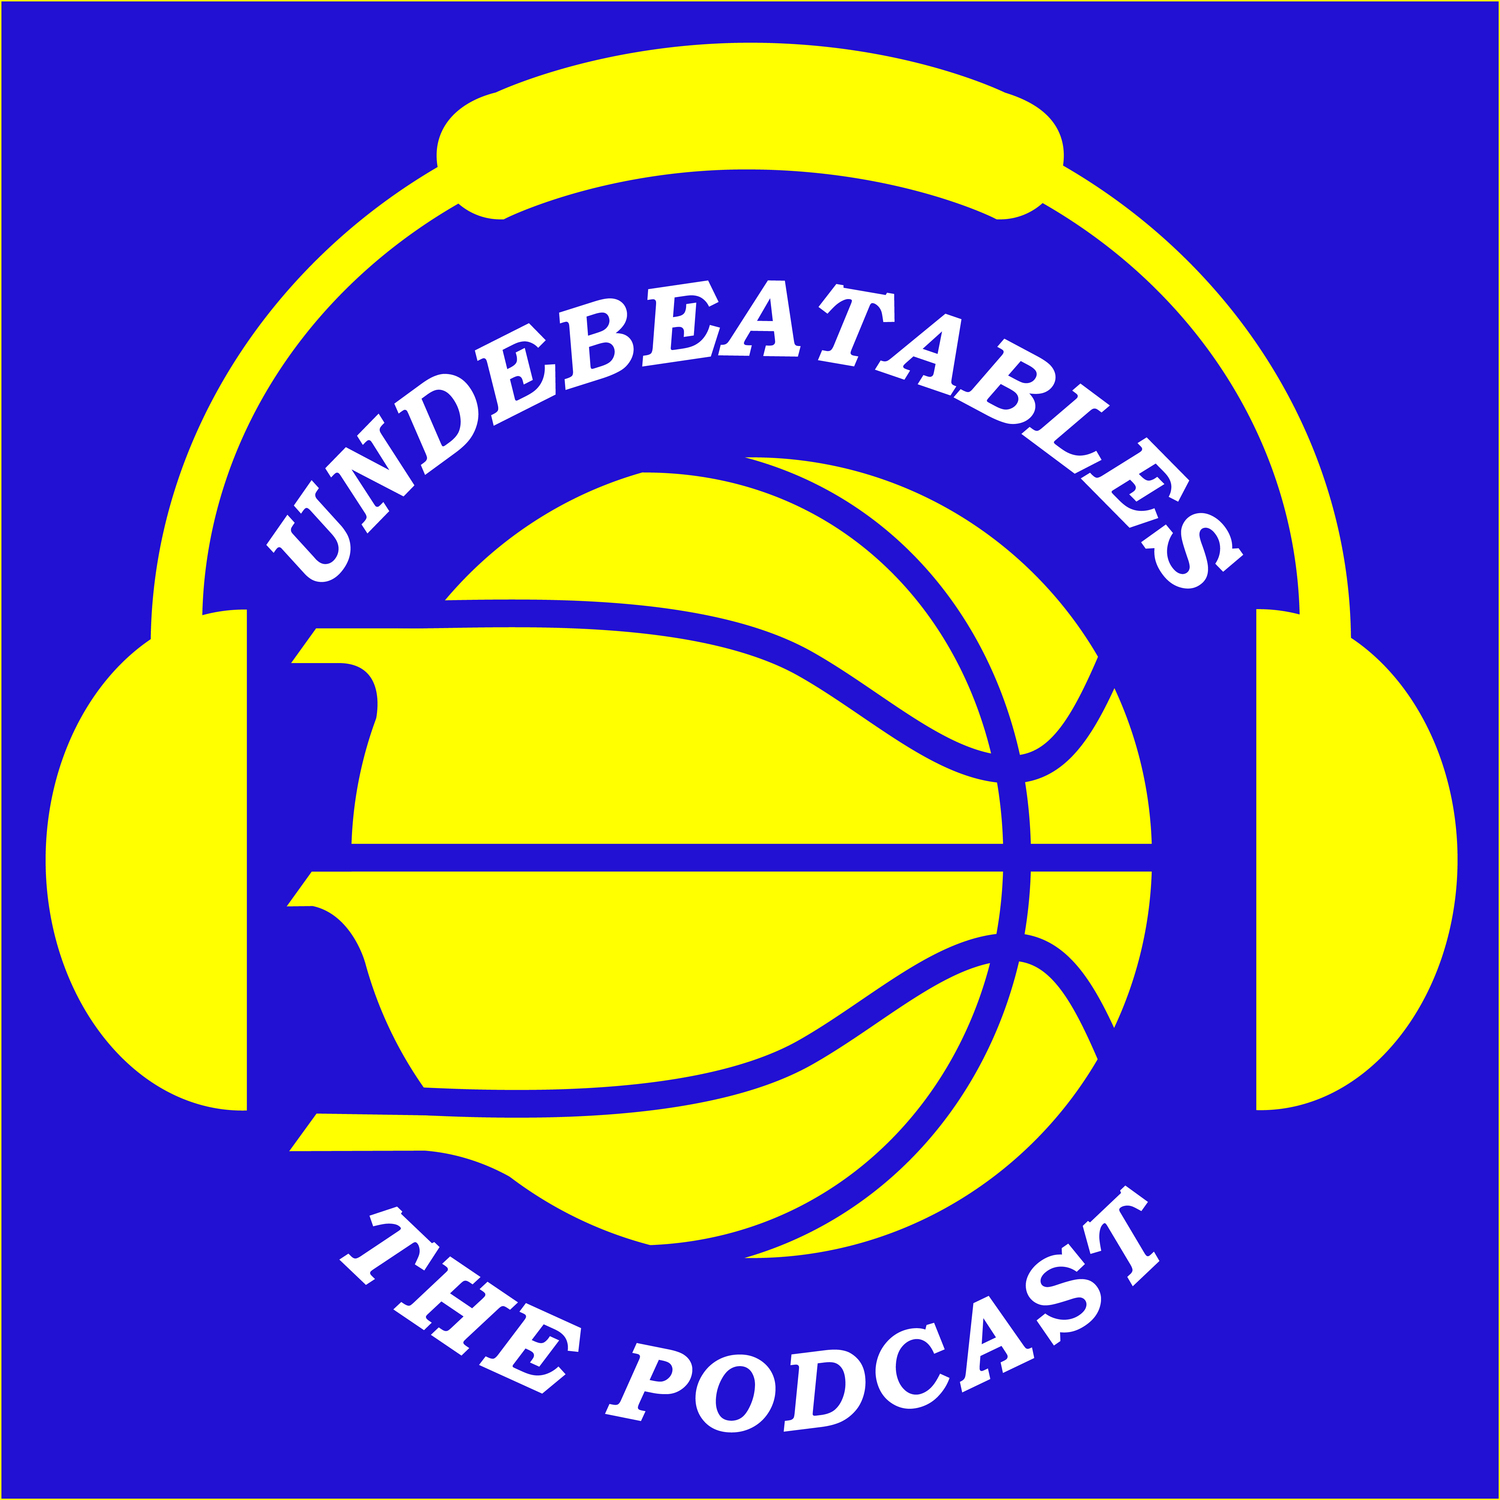 Podcast - The Undebeatables